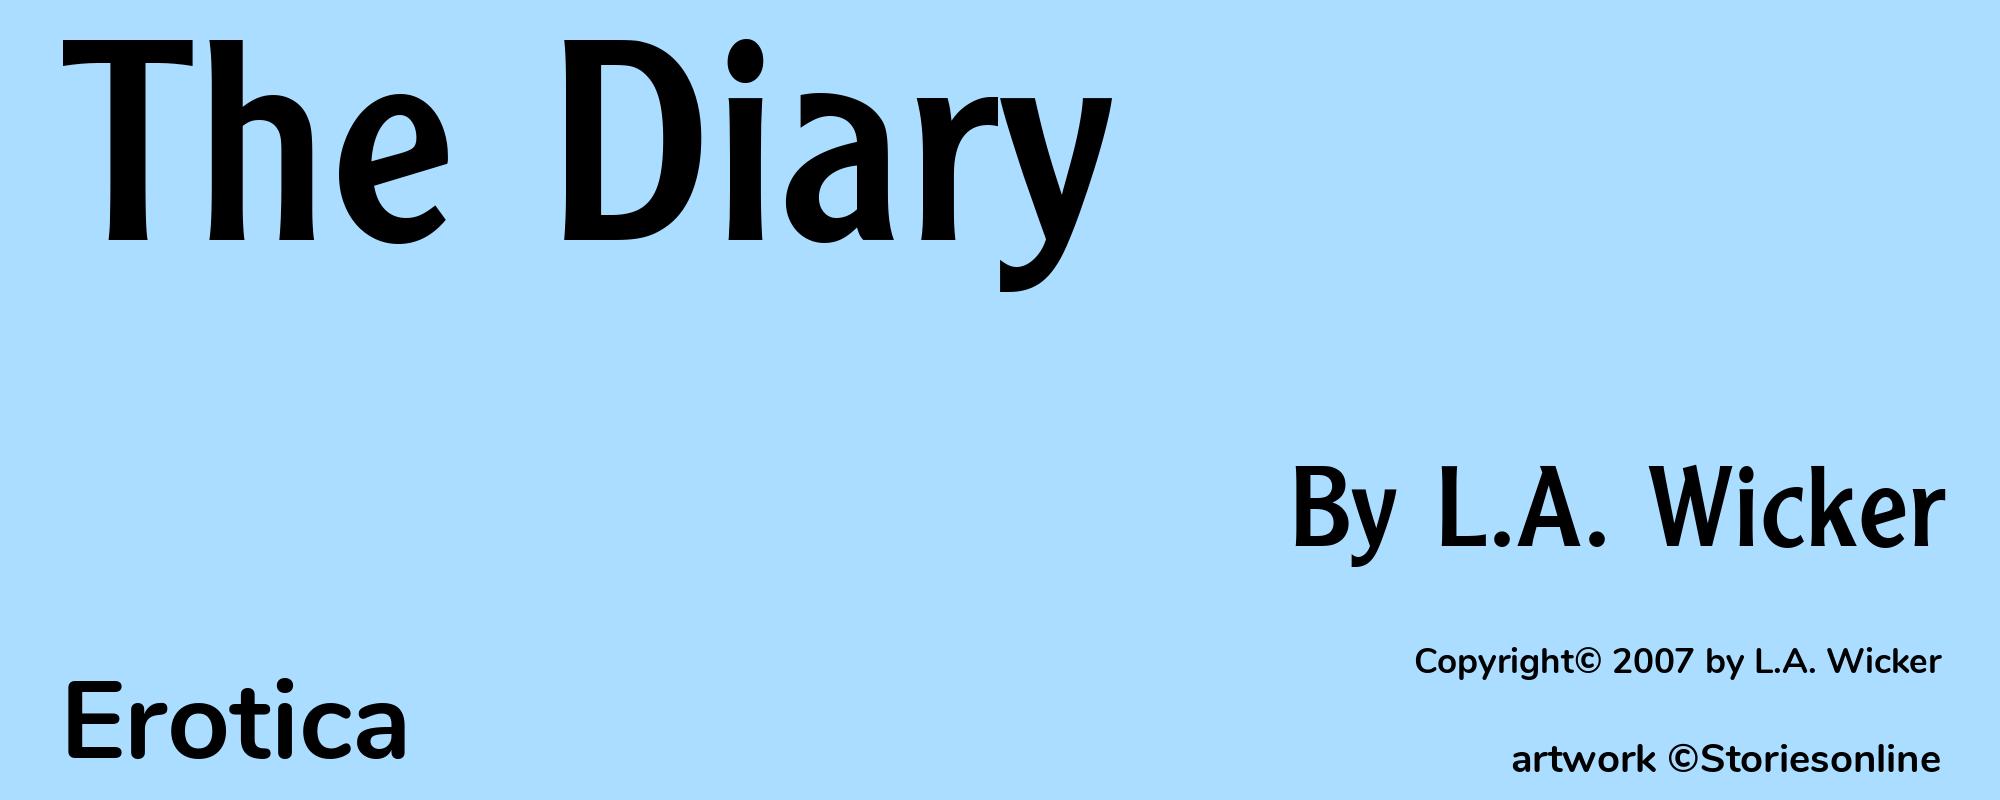 The Diary - Cover